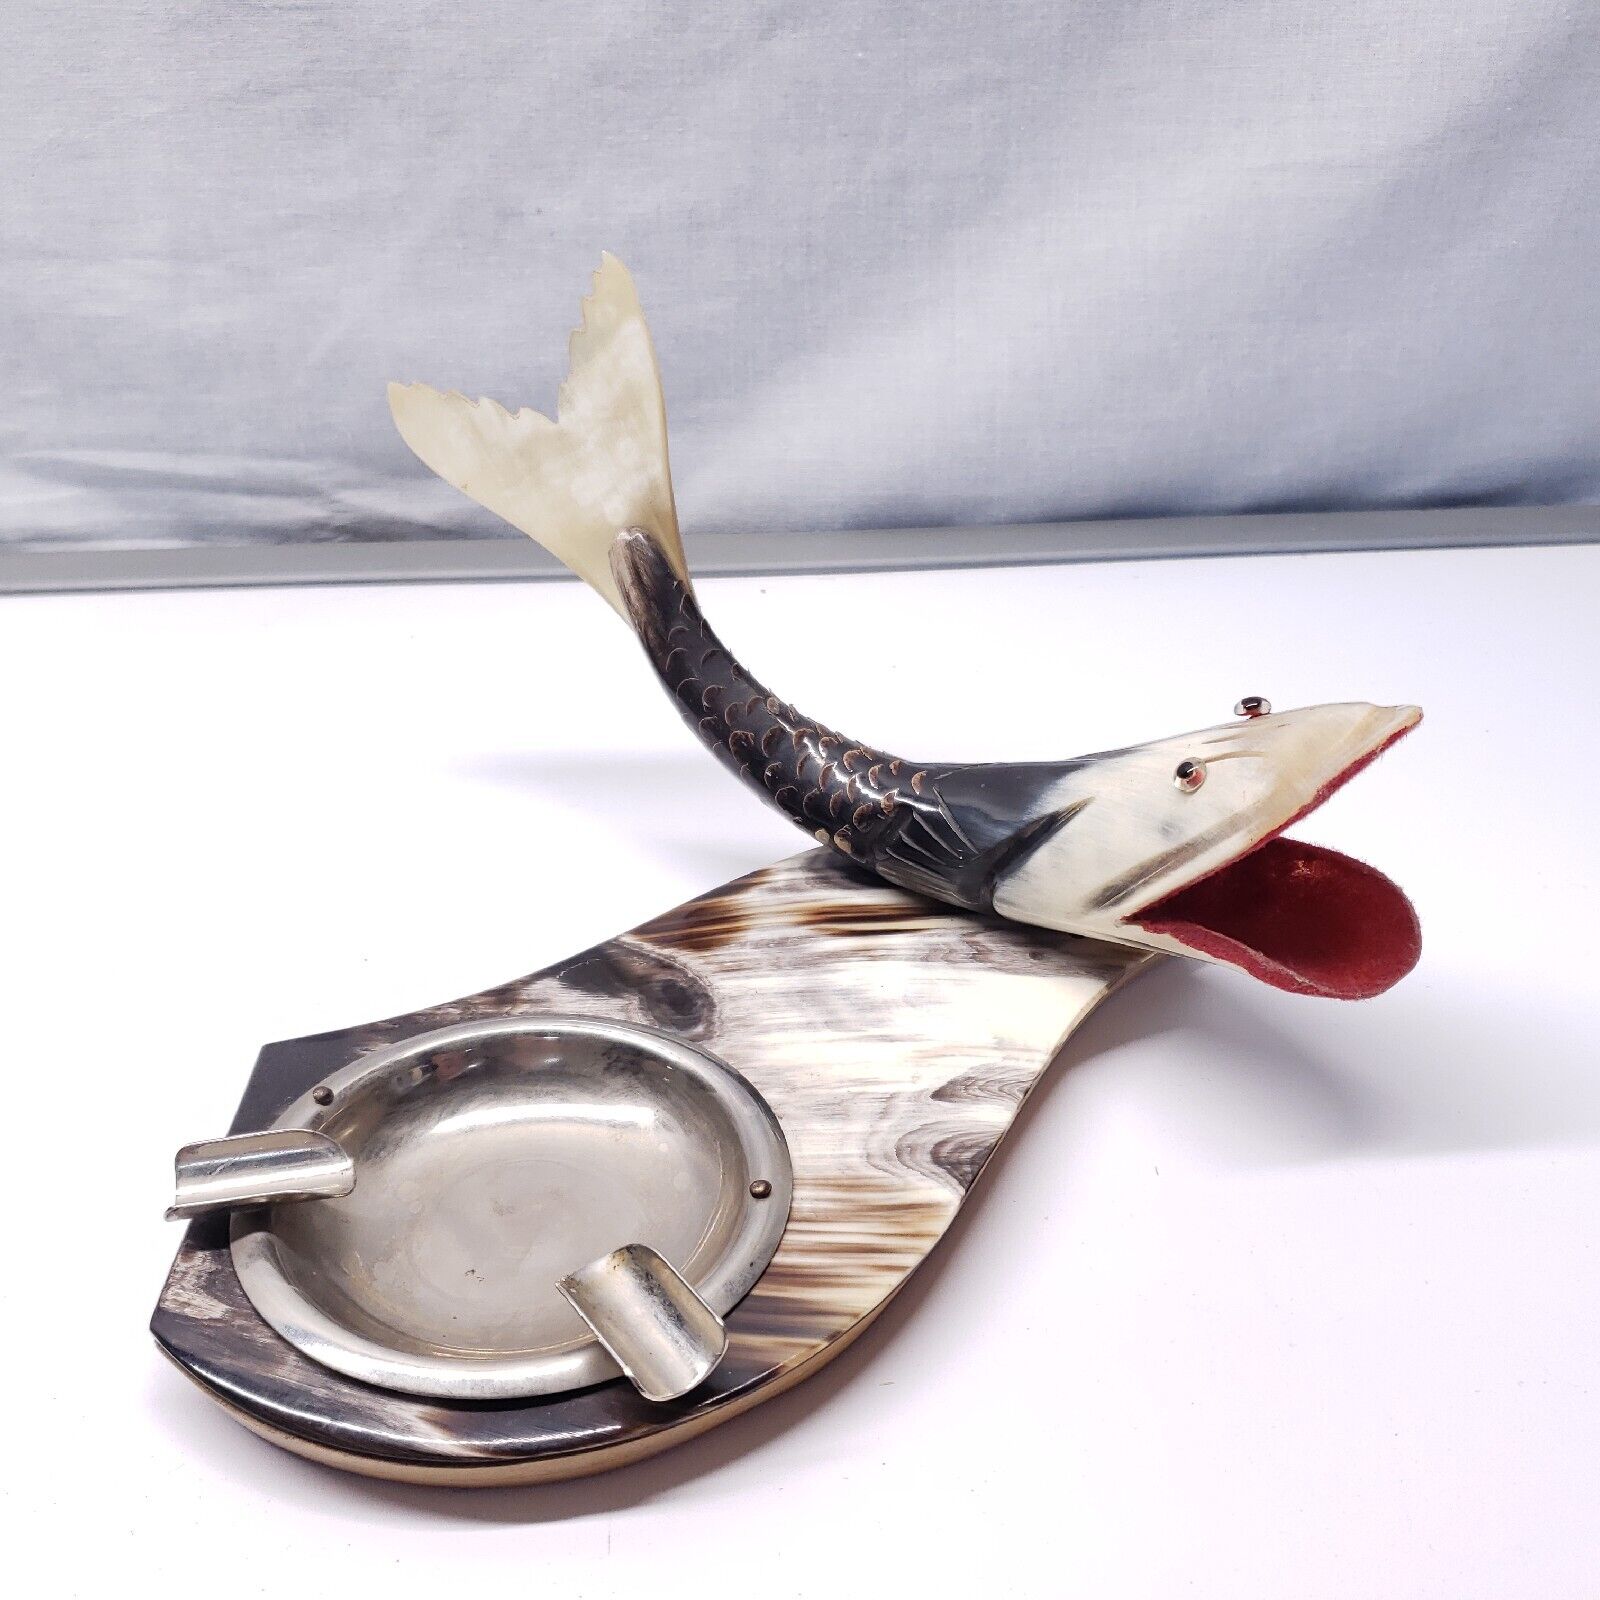 VINTAGE DECORATIVE FISH MADE OF BULLHORN W/ ASHTRAY ON WOOD COVERED W/ BULLHORN.